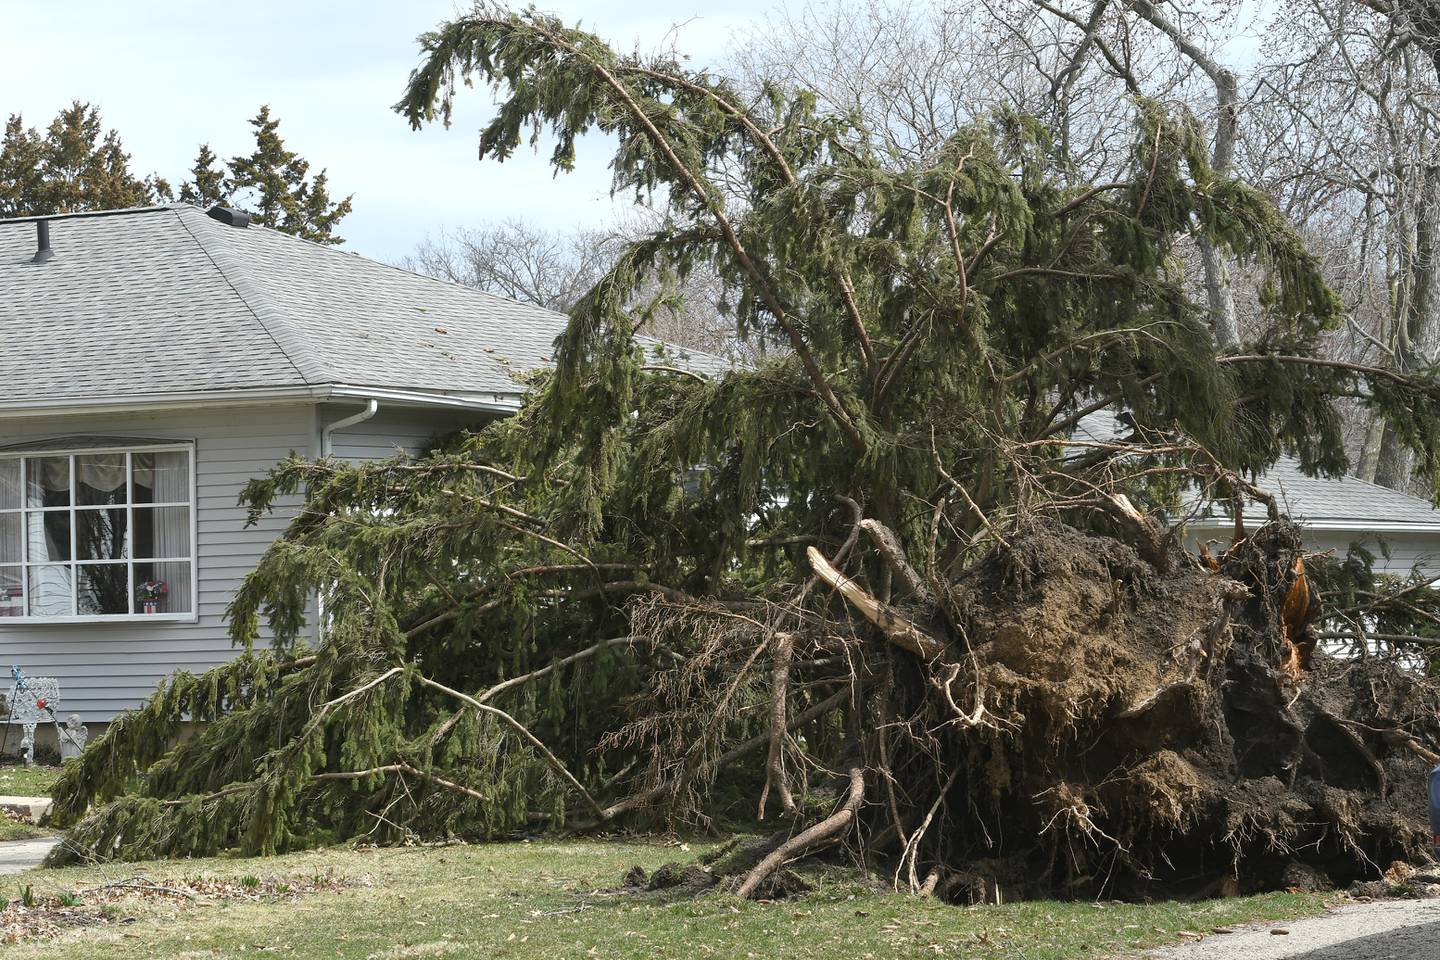 A large tree on S. Seventh Street in Oregon was uprooted following the March 31 storm that raced across the region.